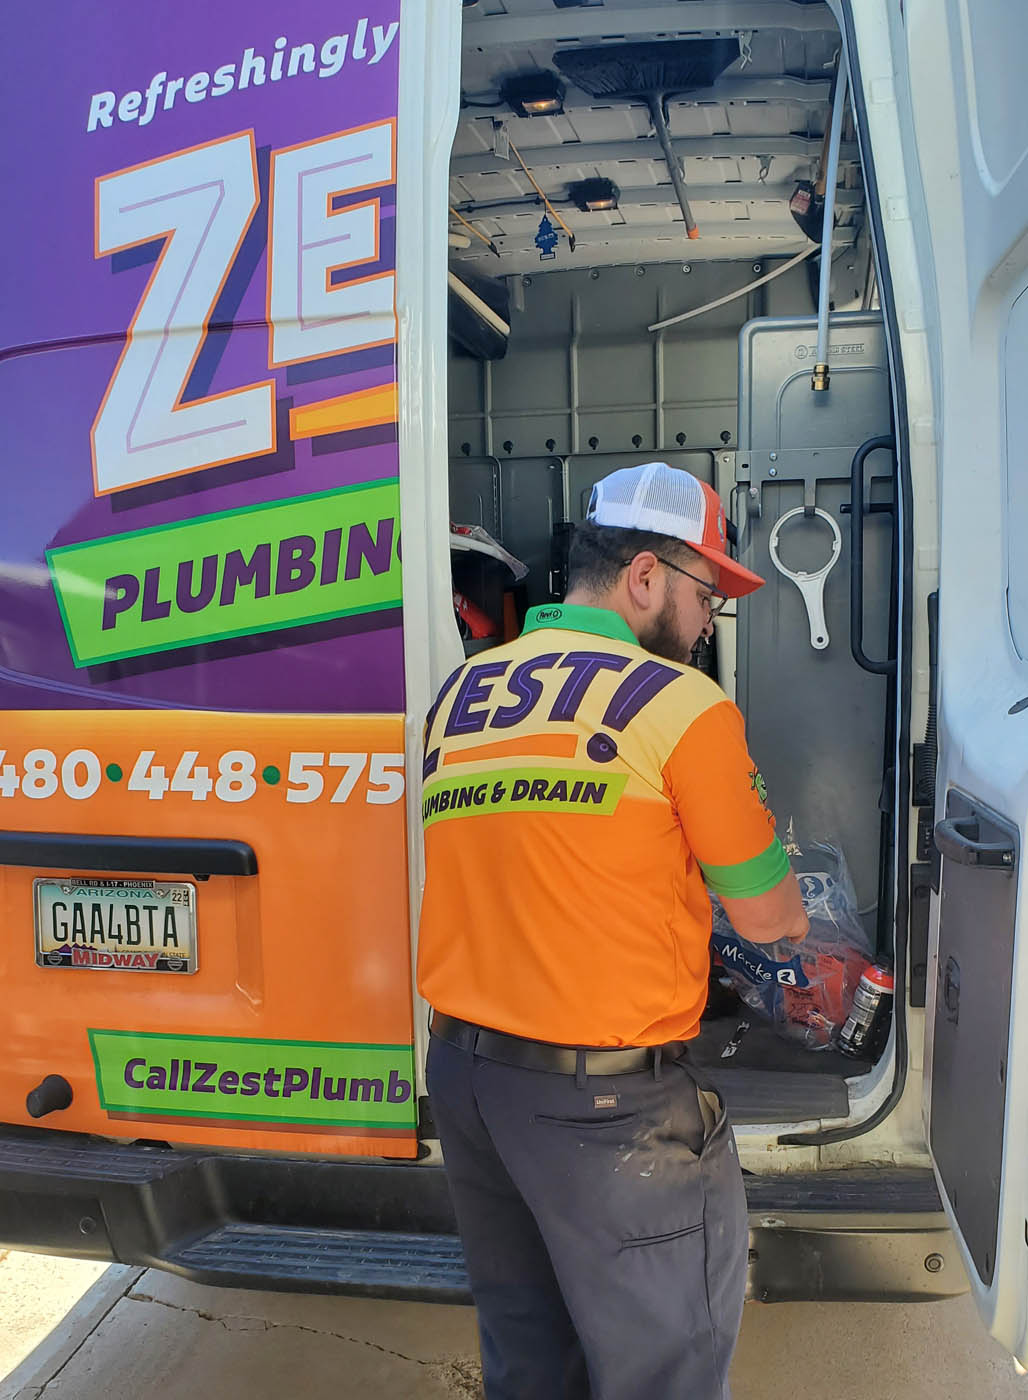 A Zest Plumbing & Drain technician getting equipment out of their truck to work on a water filter service.